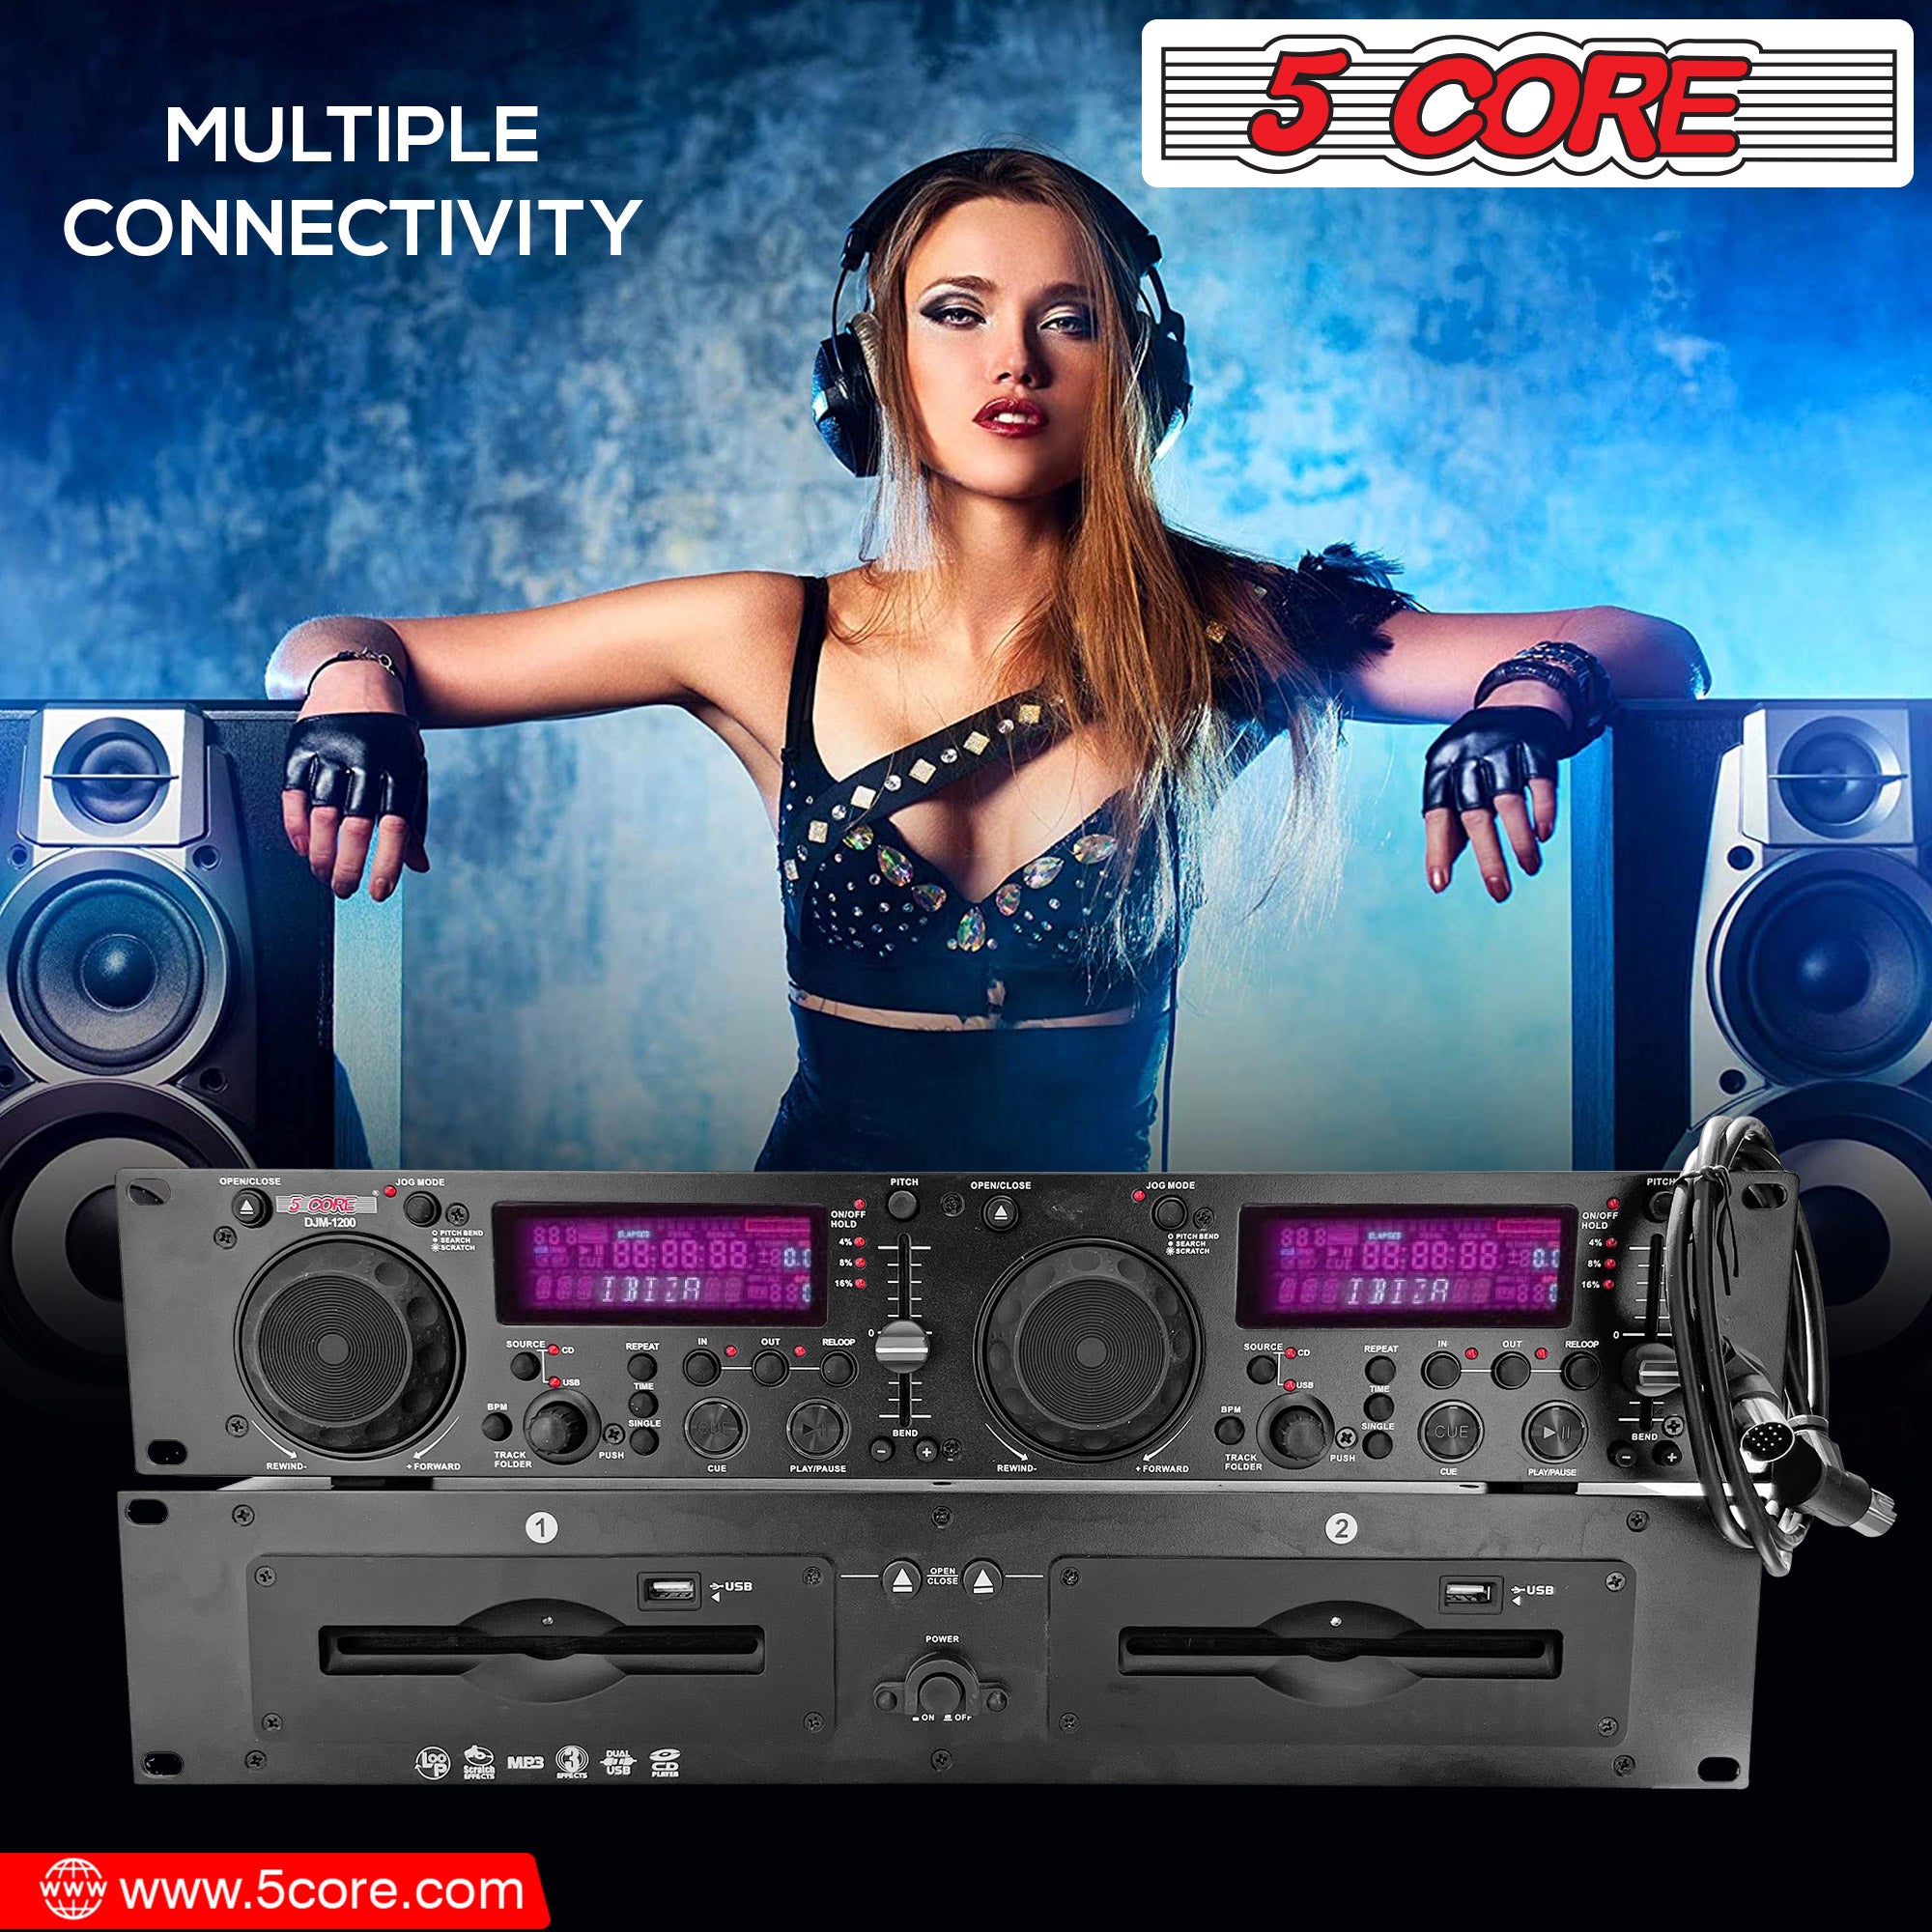 5 Core Professional Dual USB and MP3 CD Player Rack Mountable DJ Equipment with Audio Pitch Control Multimedia CD R and MP3 Compatible- DJM 1200